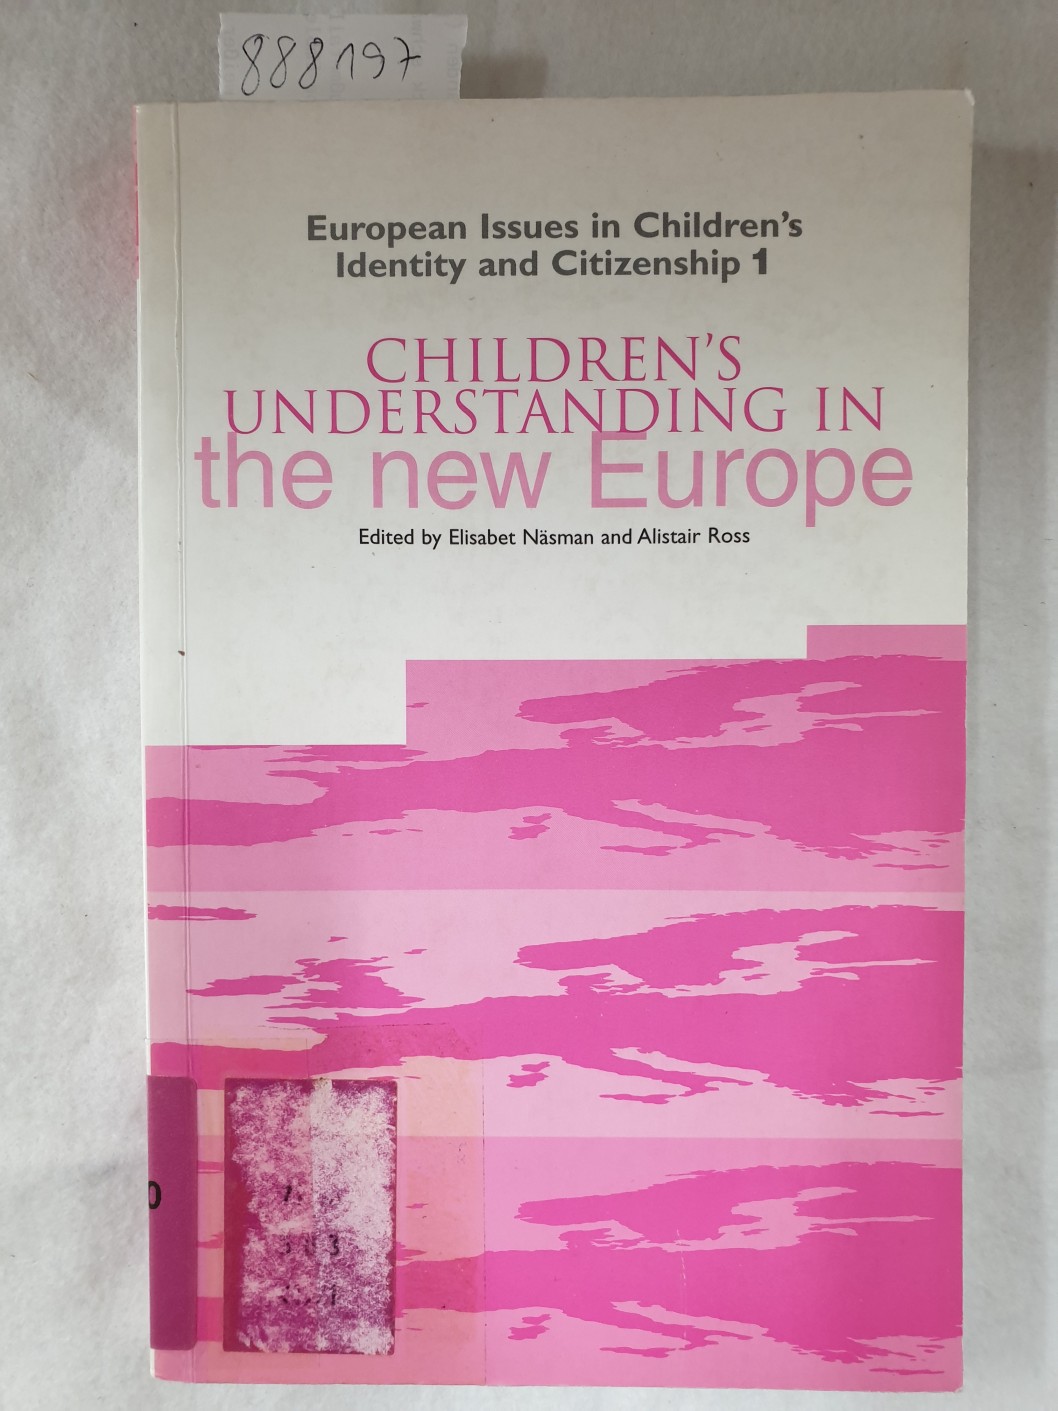 Children's Understanding in the New Europe (European Issues in Children's Identity and Citizenship 1) : - Nasman, Elisabet, Alistair Ross and Identity Citizenship in Europe (Organisation) Children's